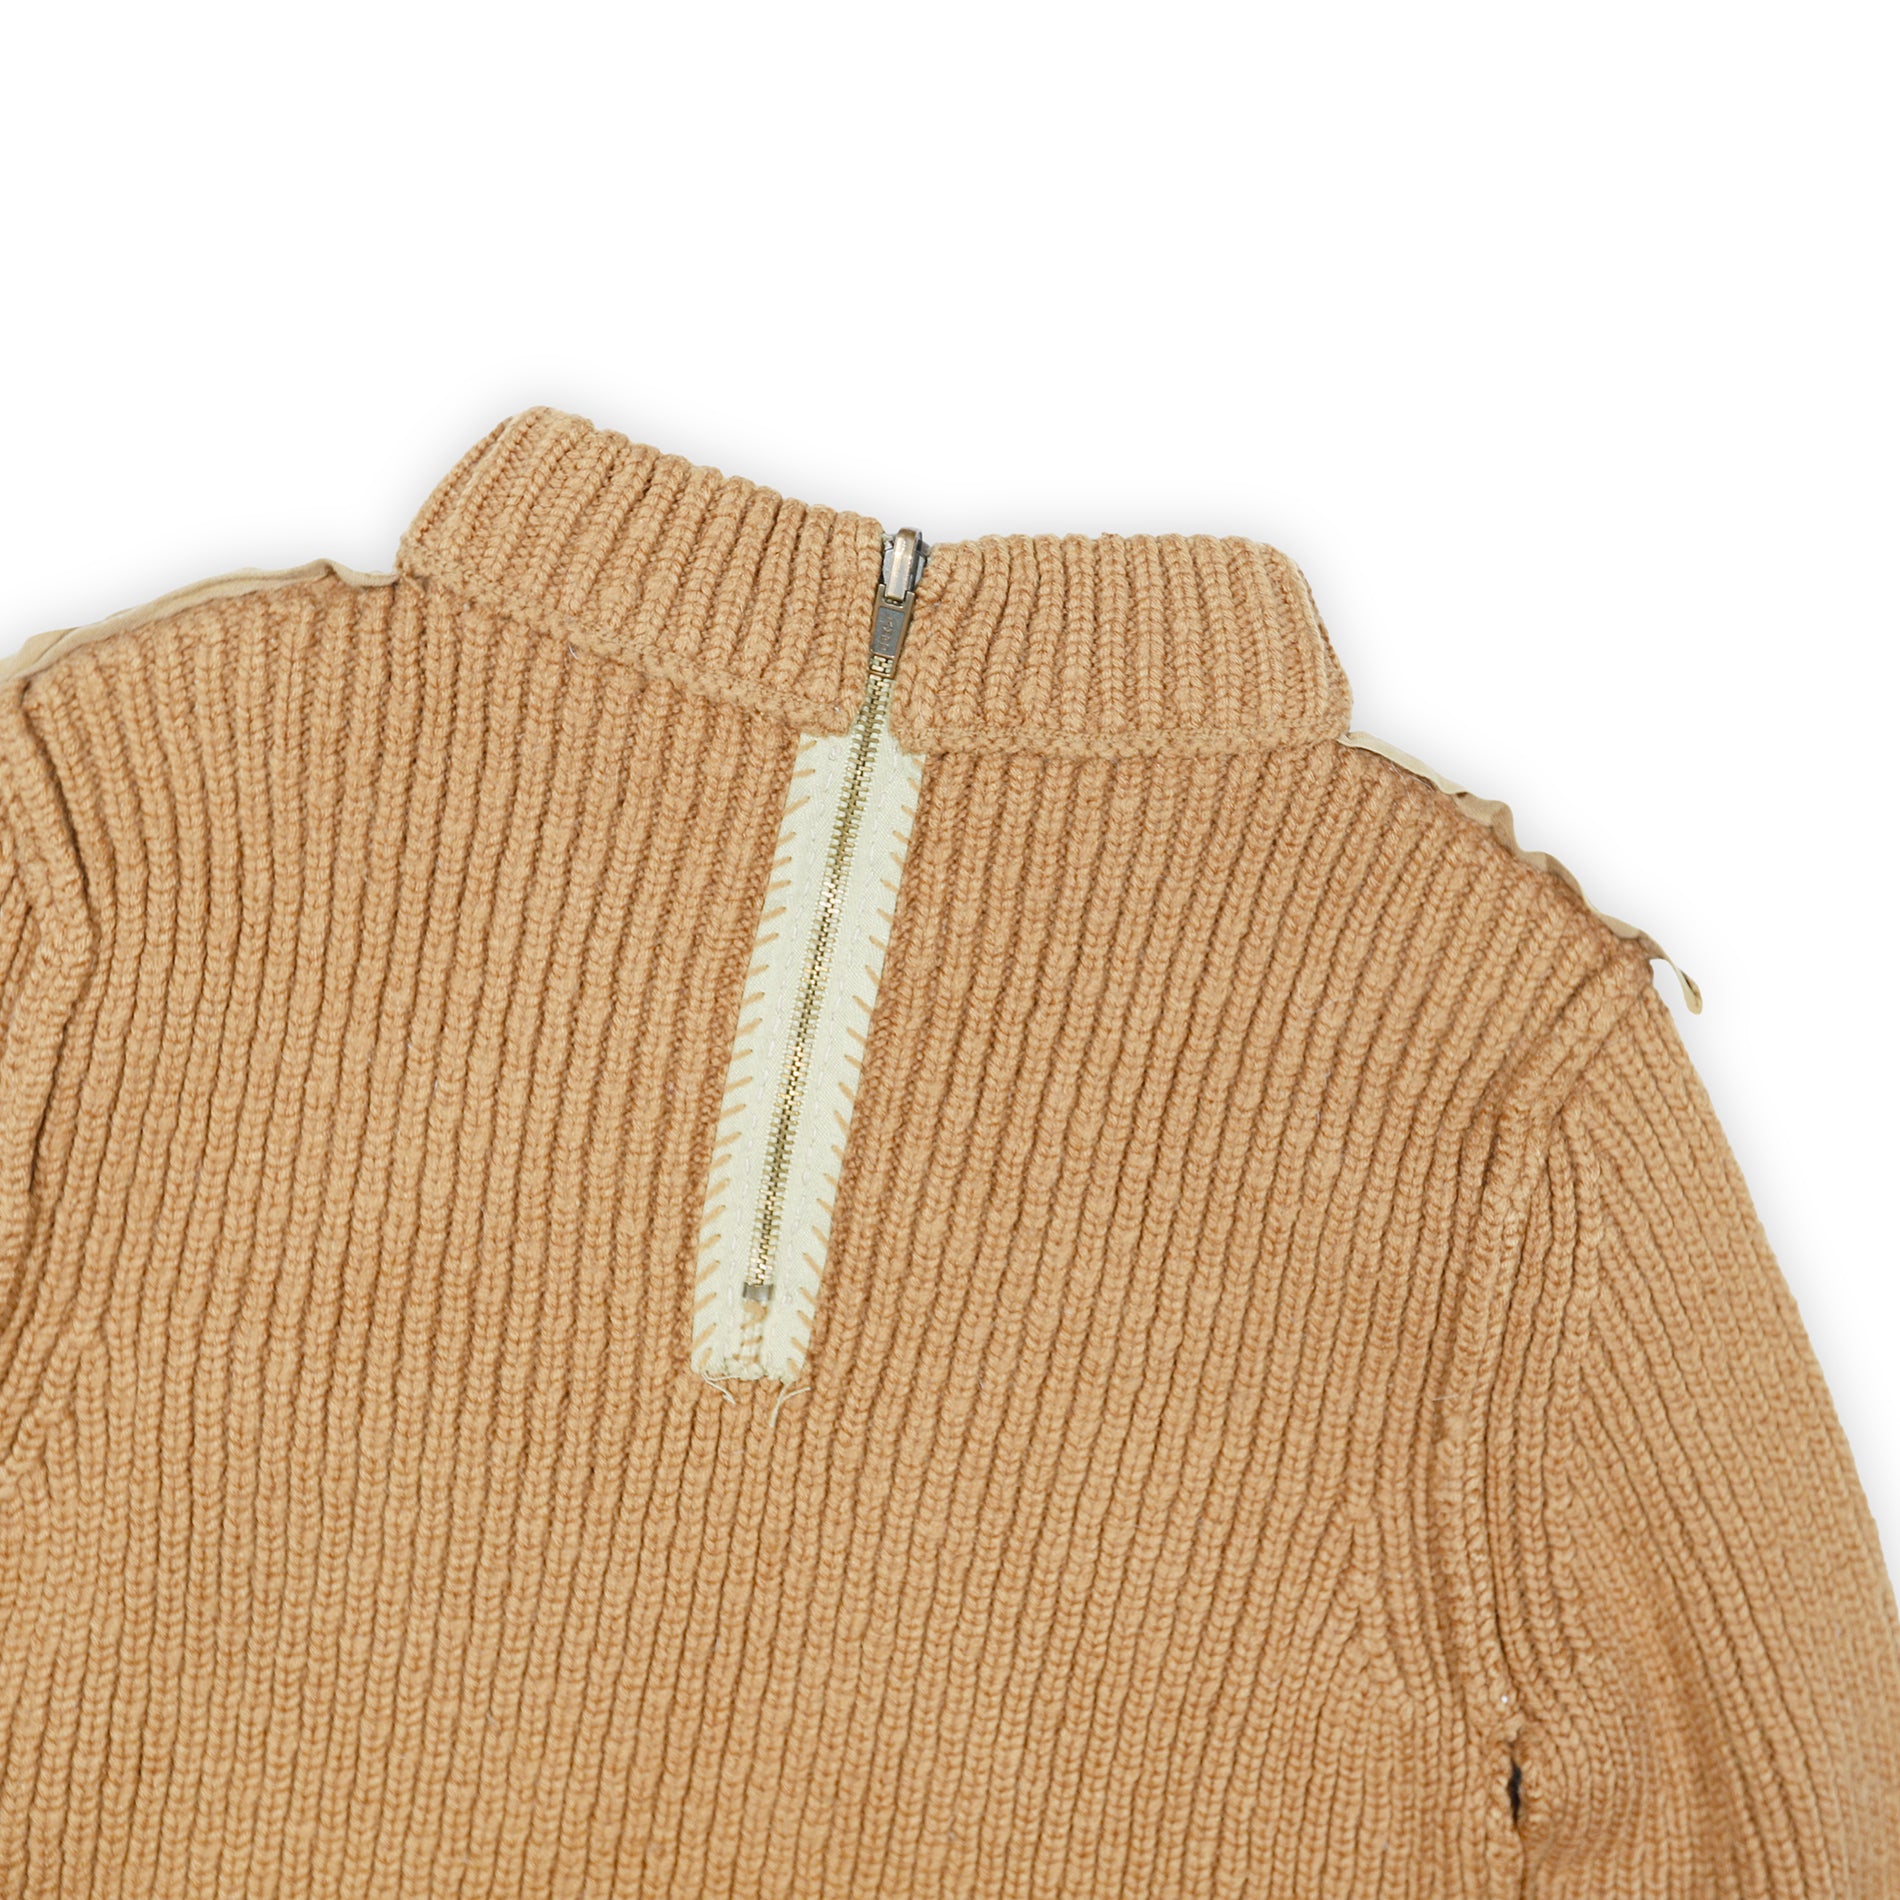 Maison Martin Margiela FW97 Miss Deanna Inside Out Reversible Military Knit Sweater